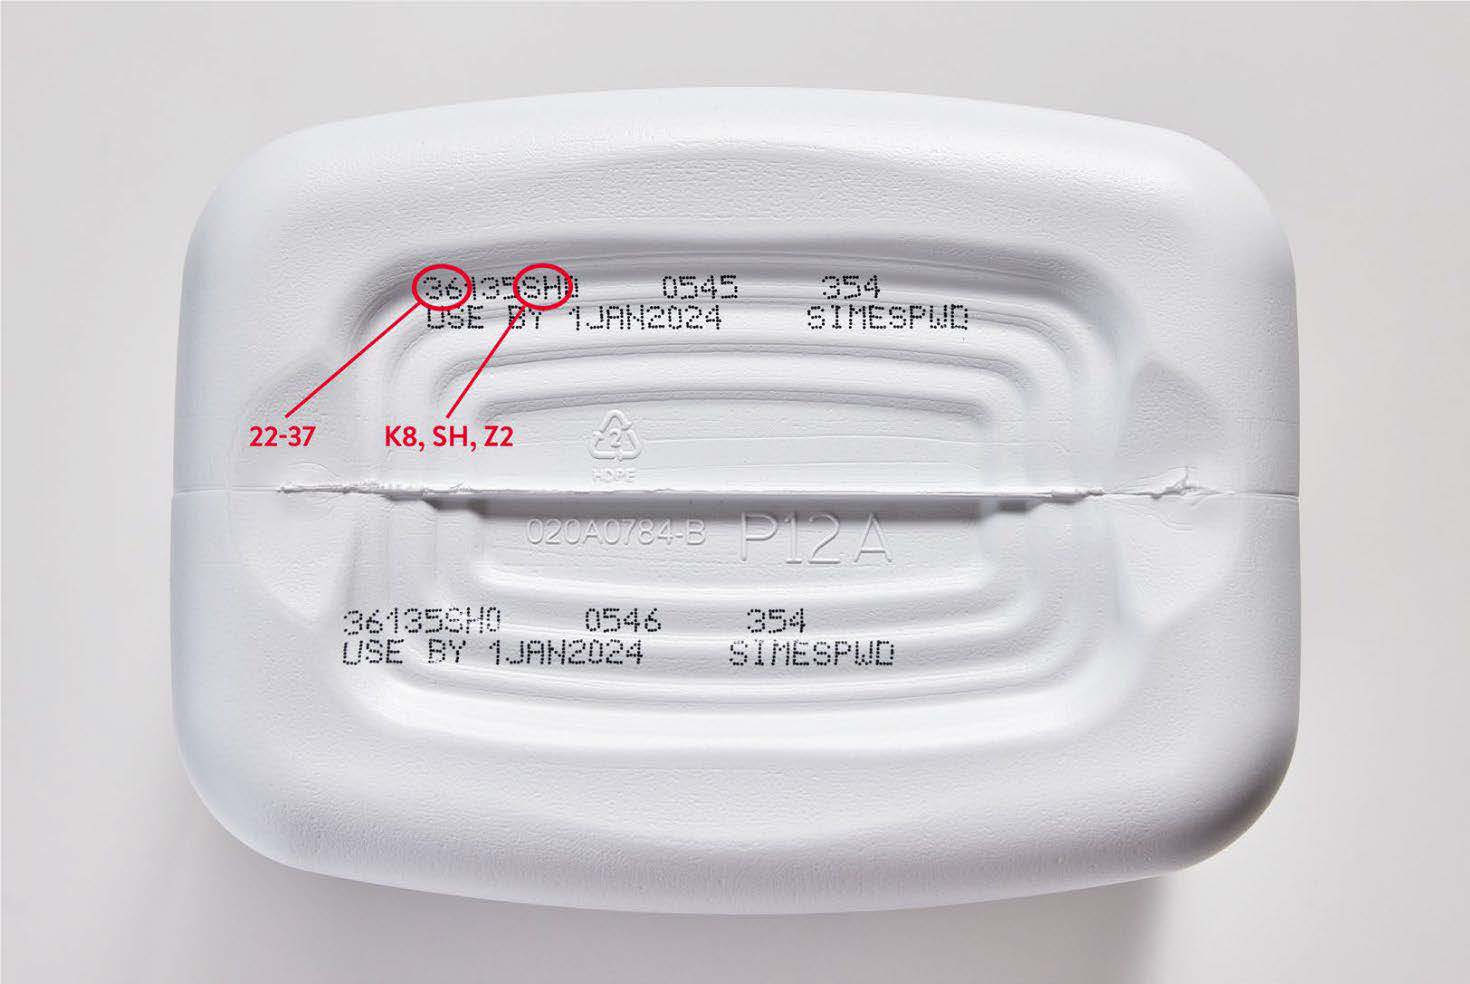 example of infant formula and where to locate multi-digit number of affected product.